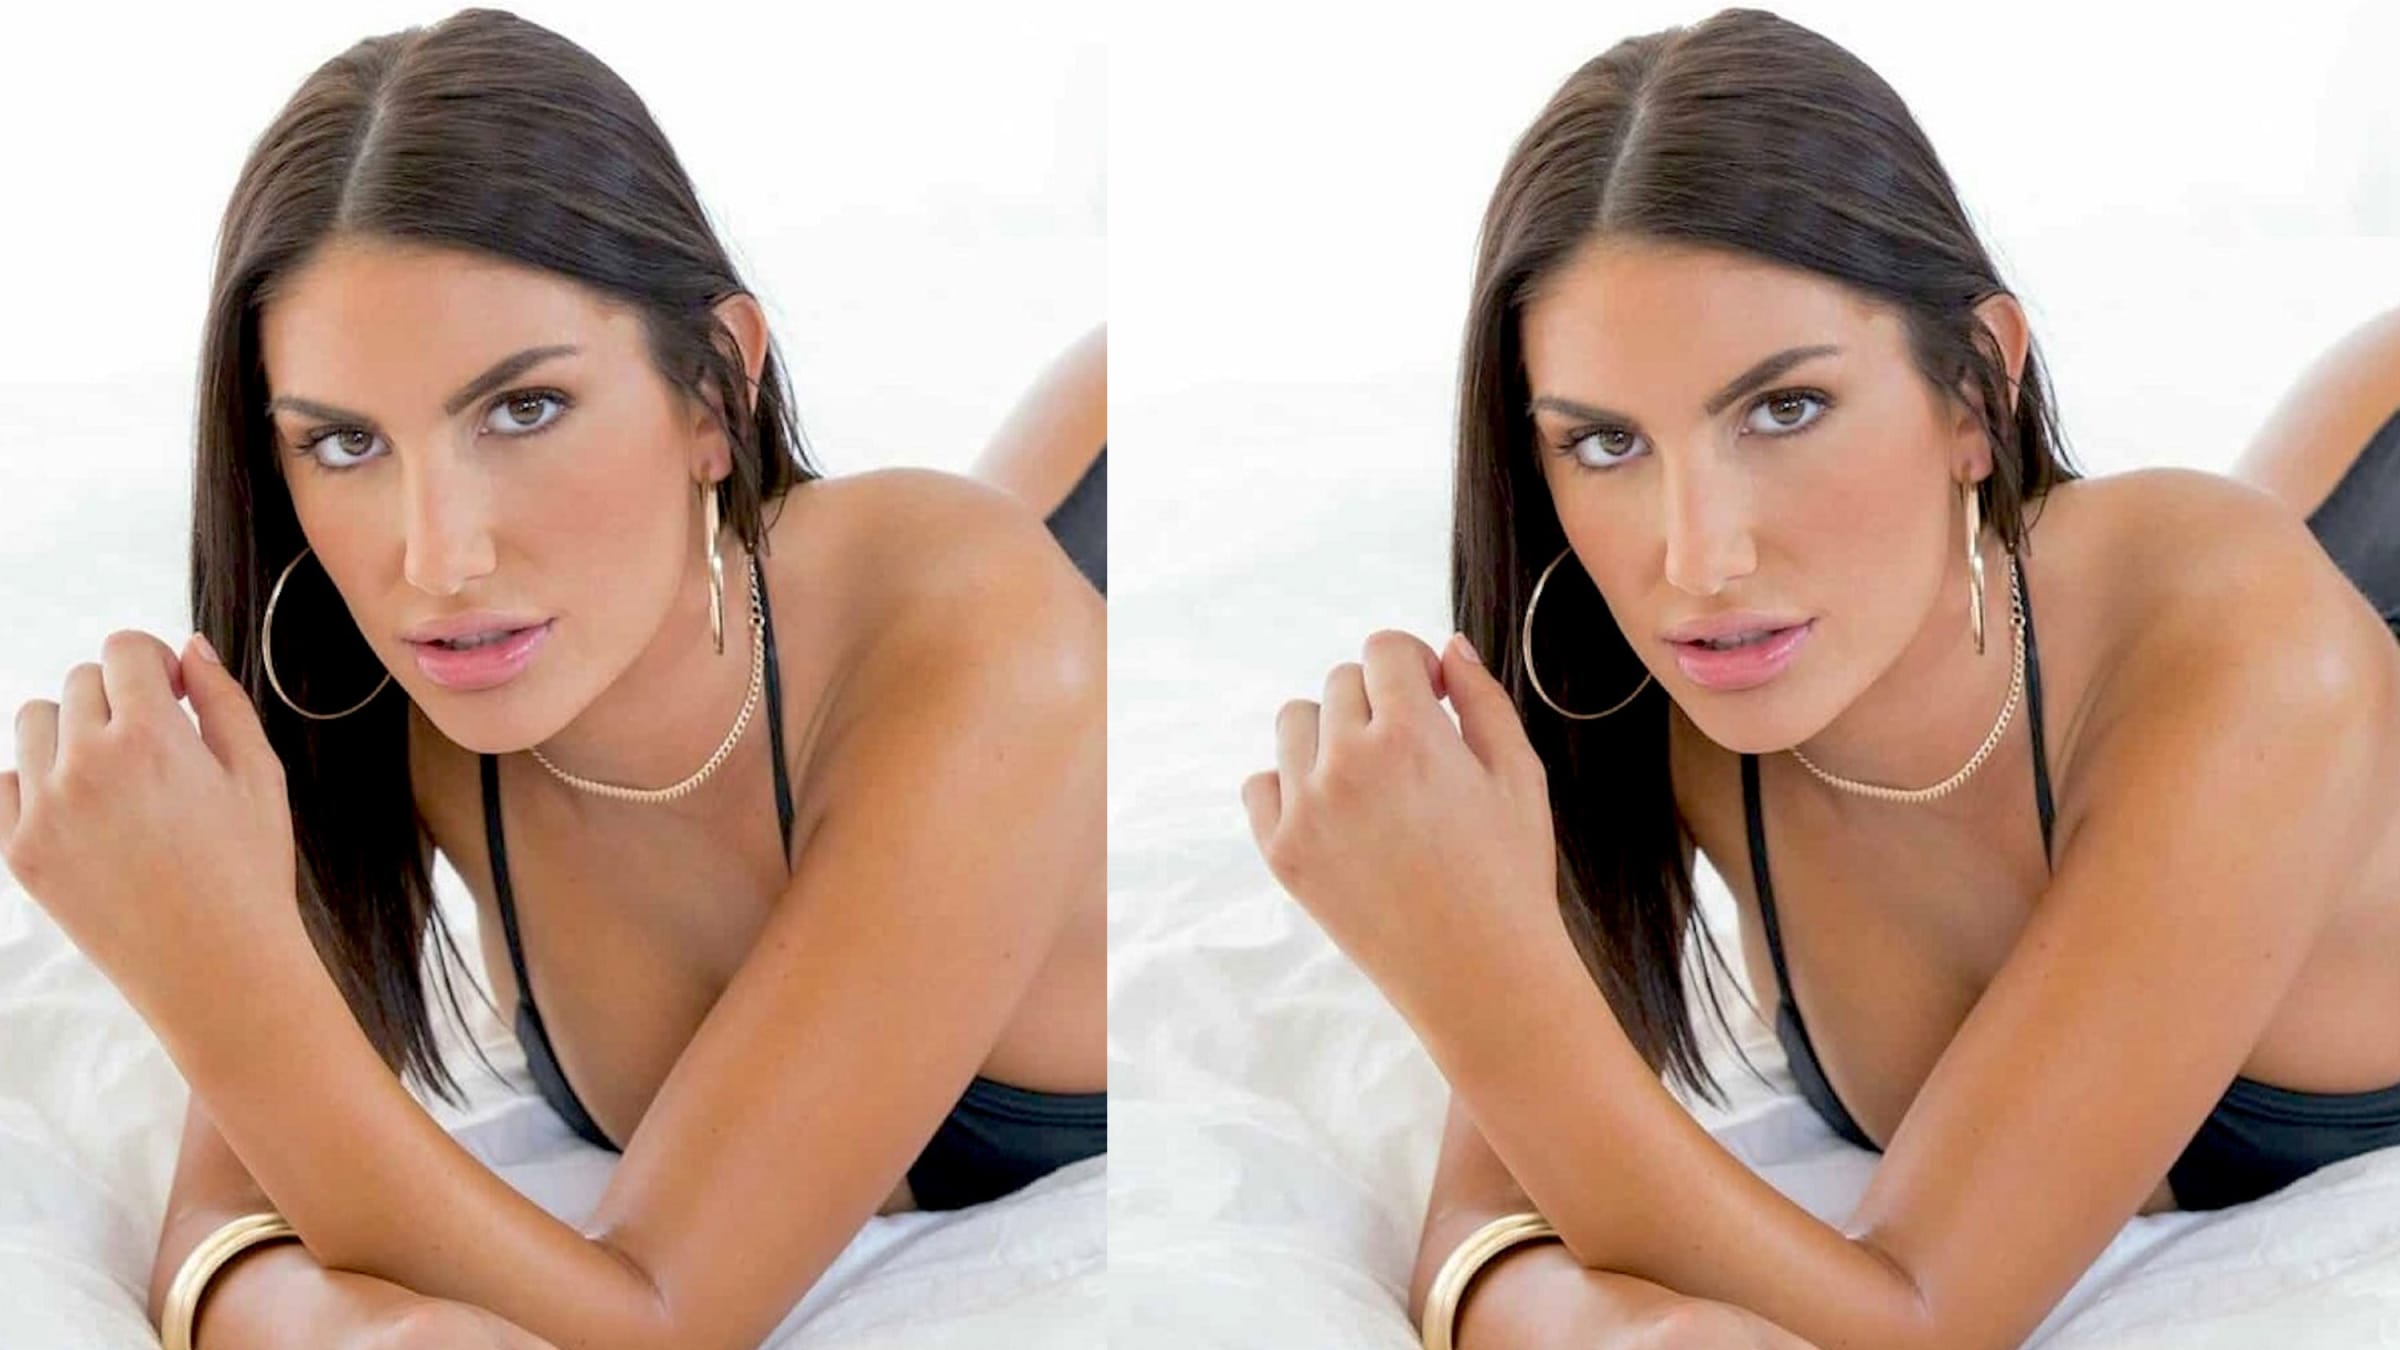 Block Porn Stars - Mother of 'Cyberbullied' Porn Star August Ames Opens Up About Her Last Days